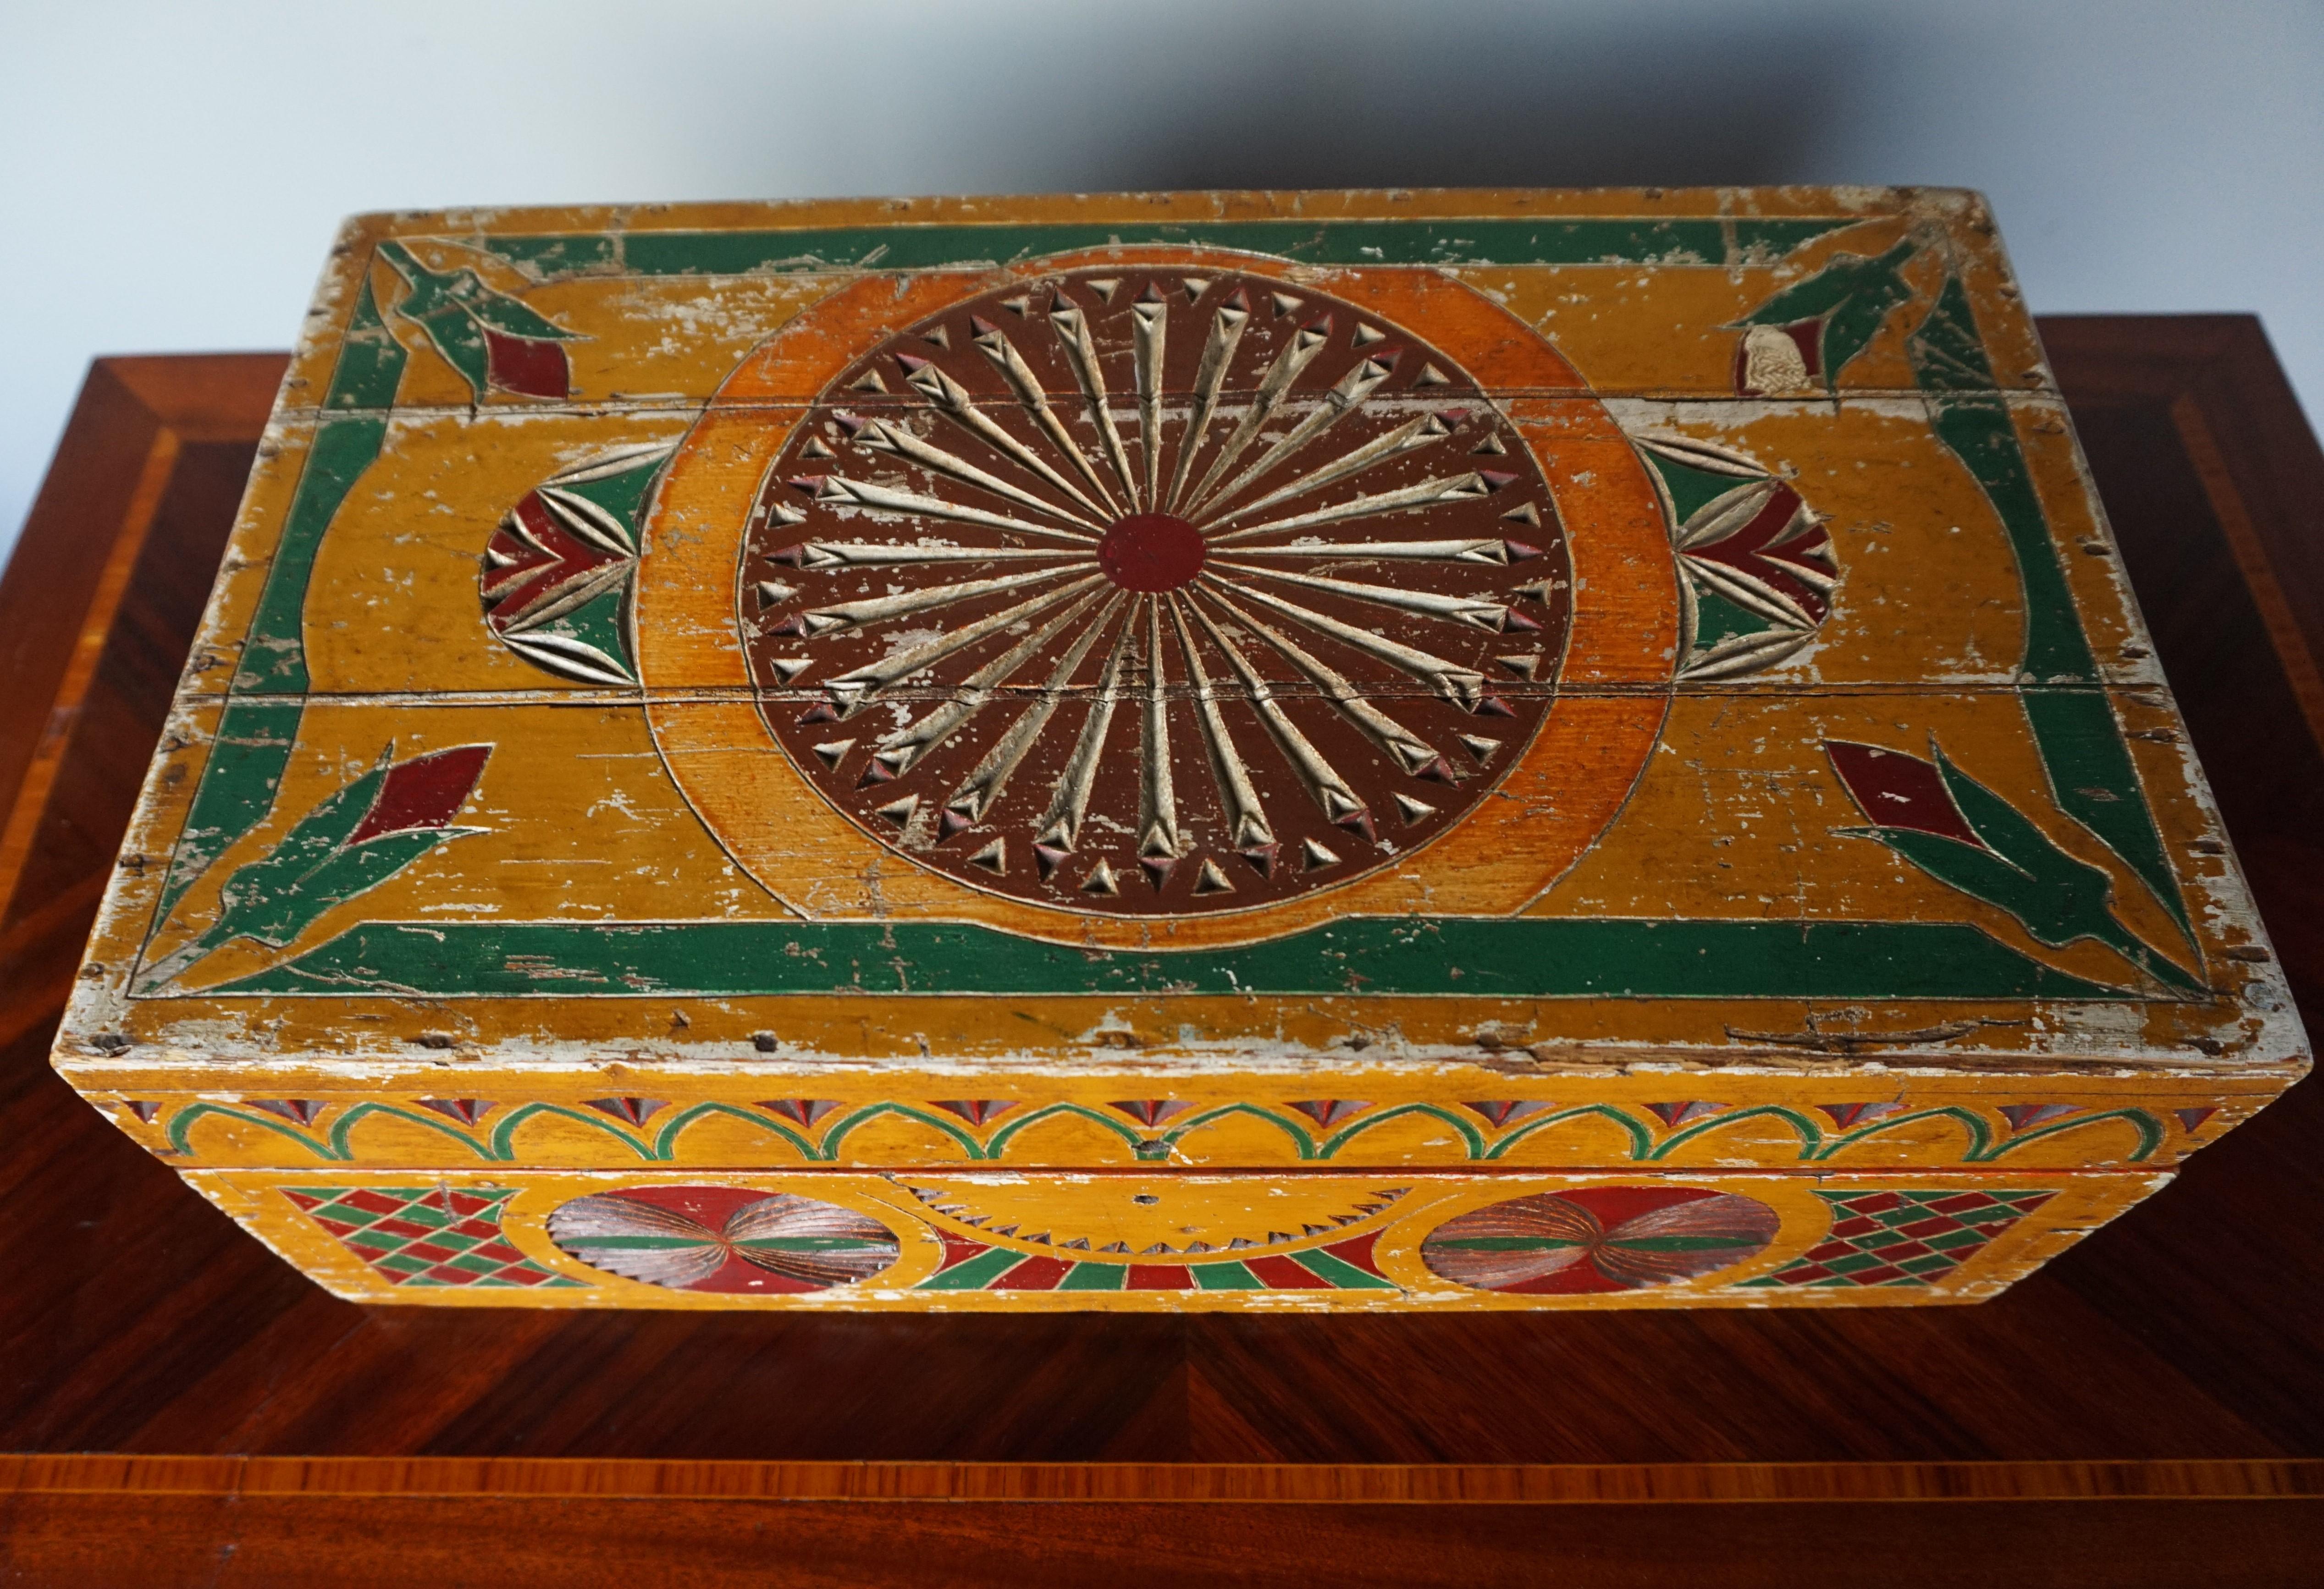 Dutch Hand-Crafted, Hand Carved & Hand Painted Arts and Crafts Box w. Stylized Flowers